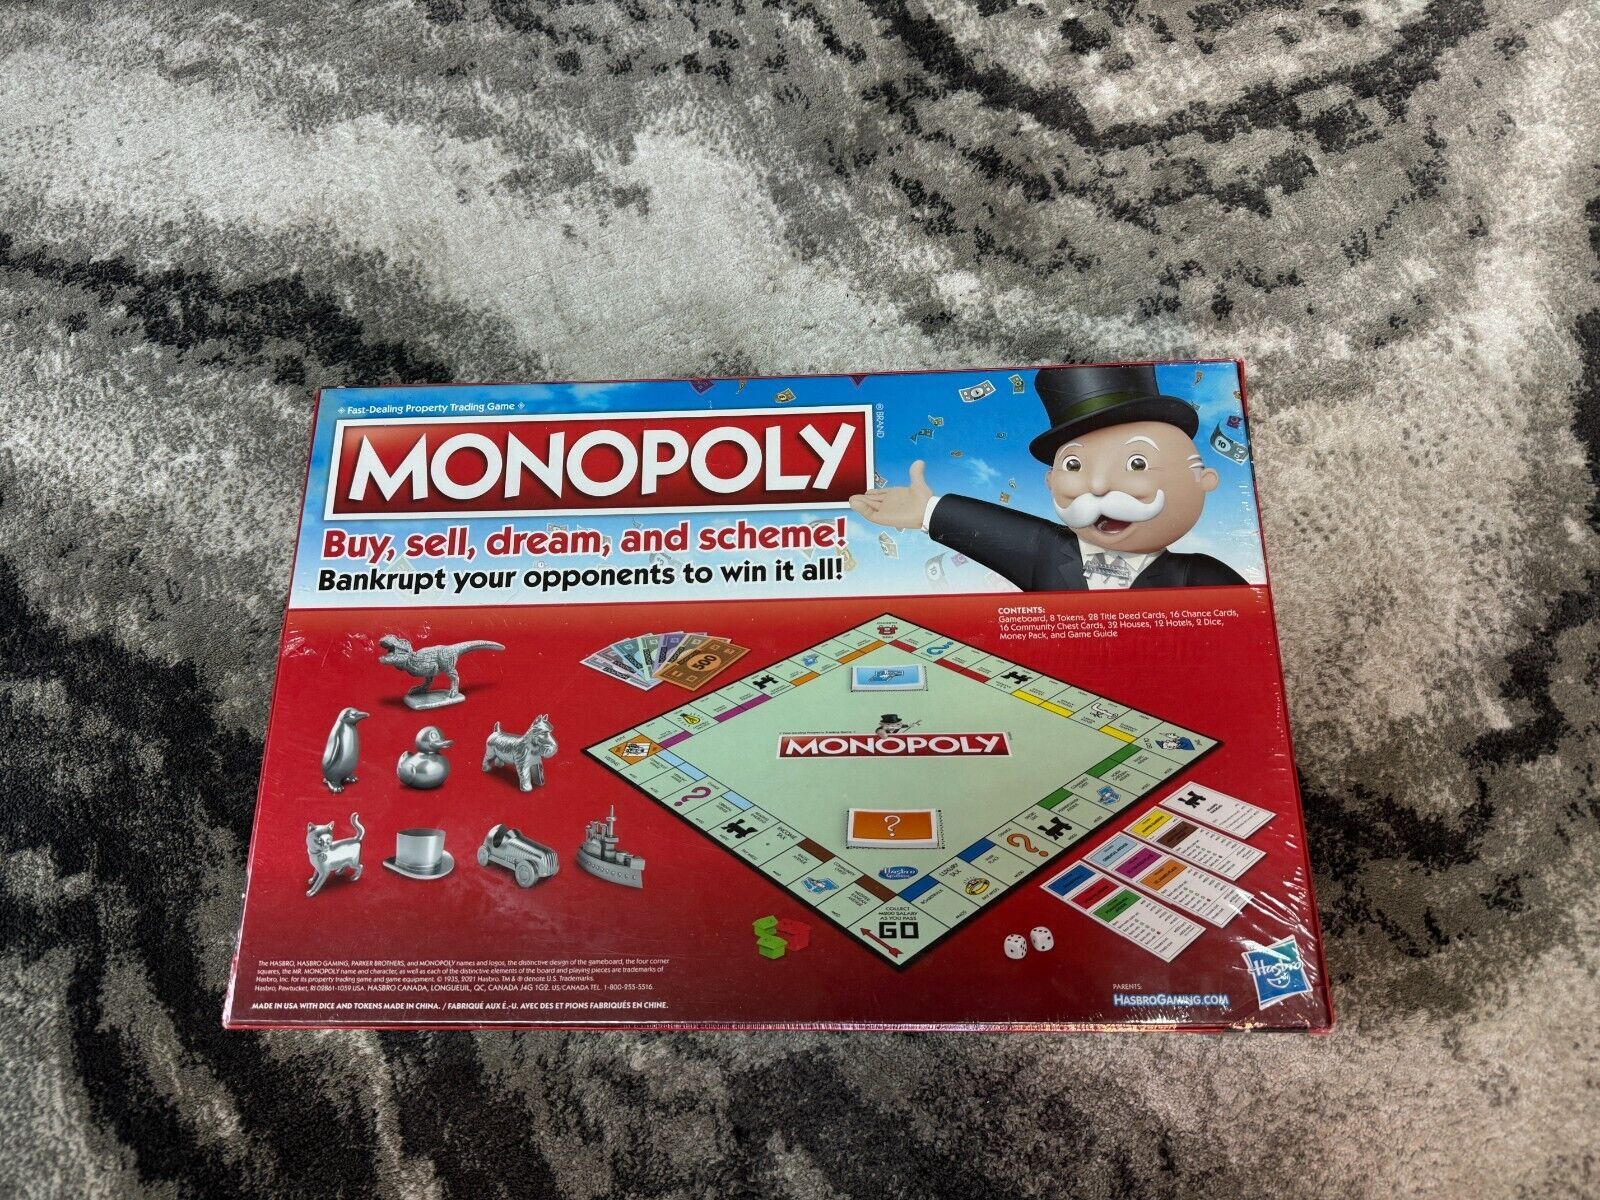 Brand New Sealed Monopoly Board Game - Classic Family Fun Awaits!